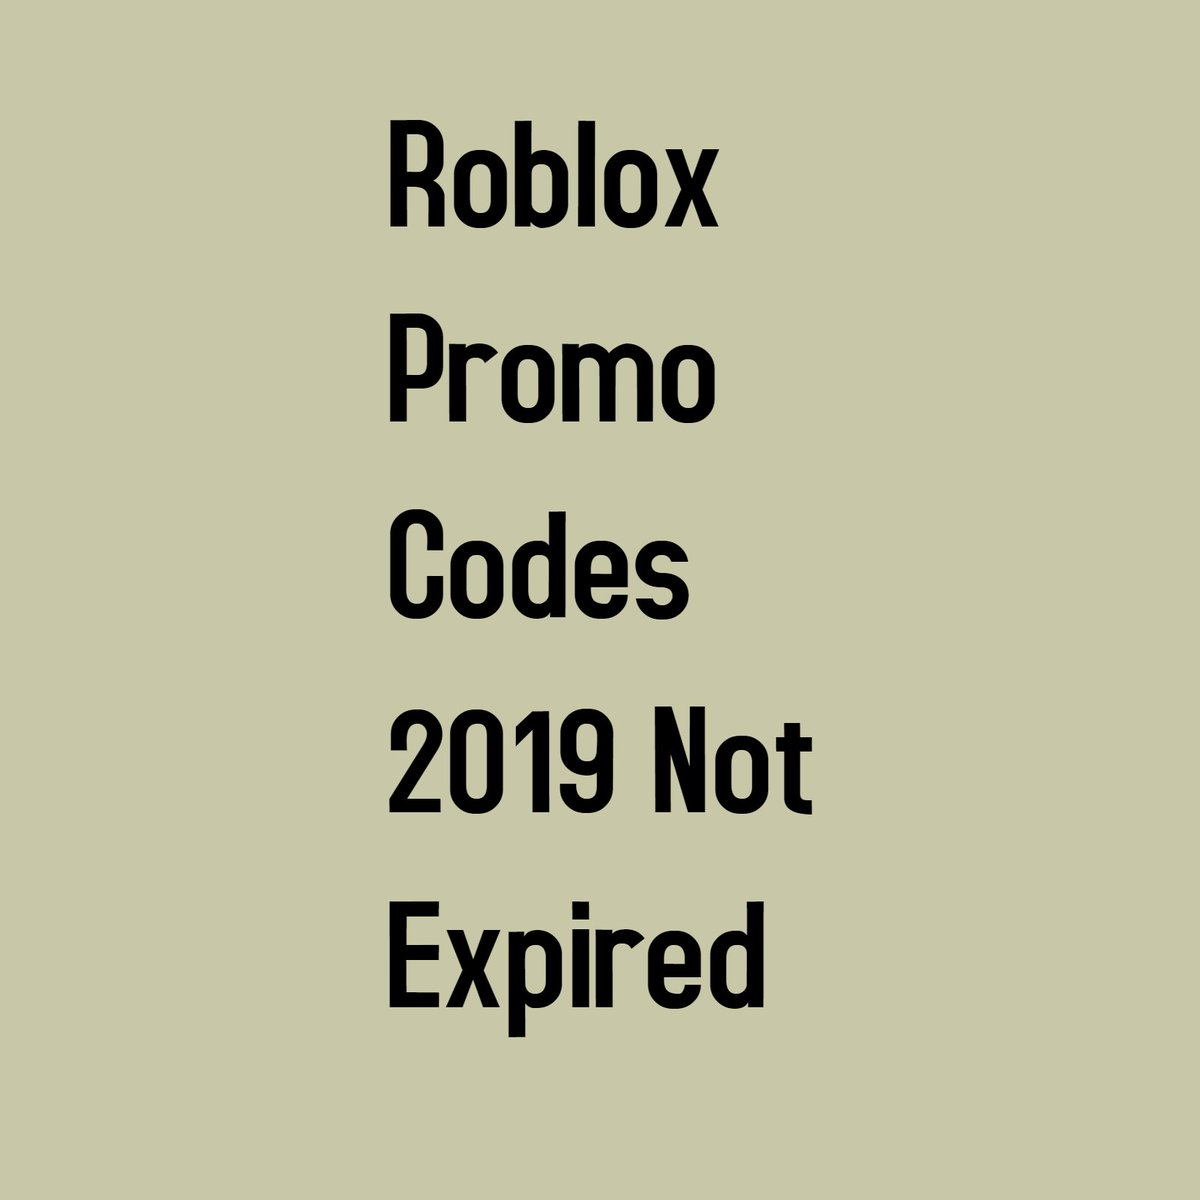 Robloxpromocodes2019notexpired Hashtag On Twitter - roblox codes 2019 list 100 working